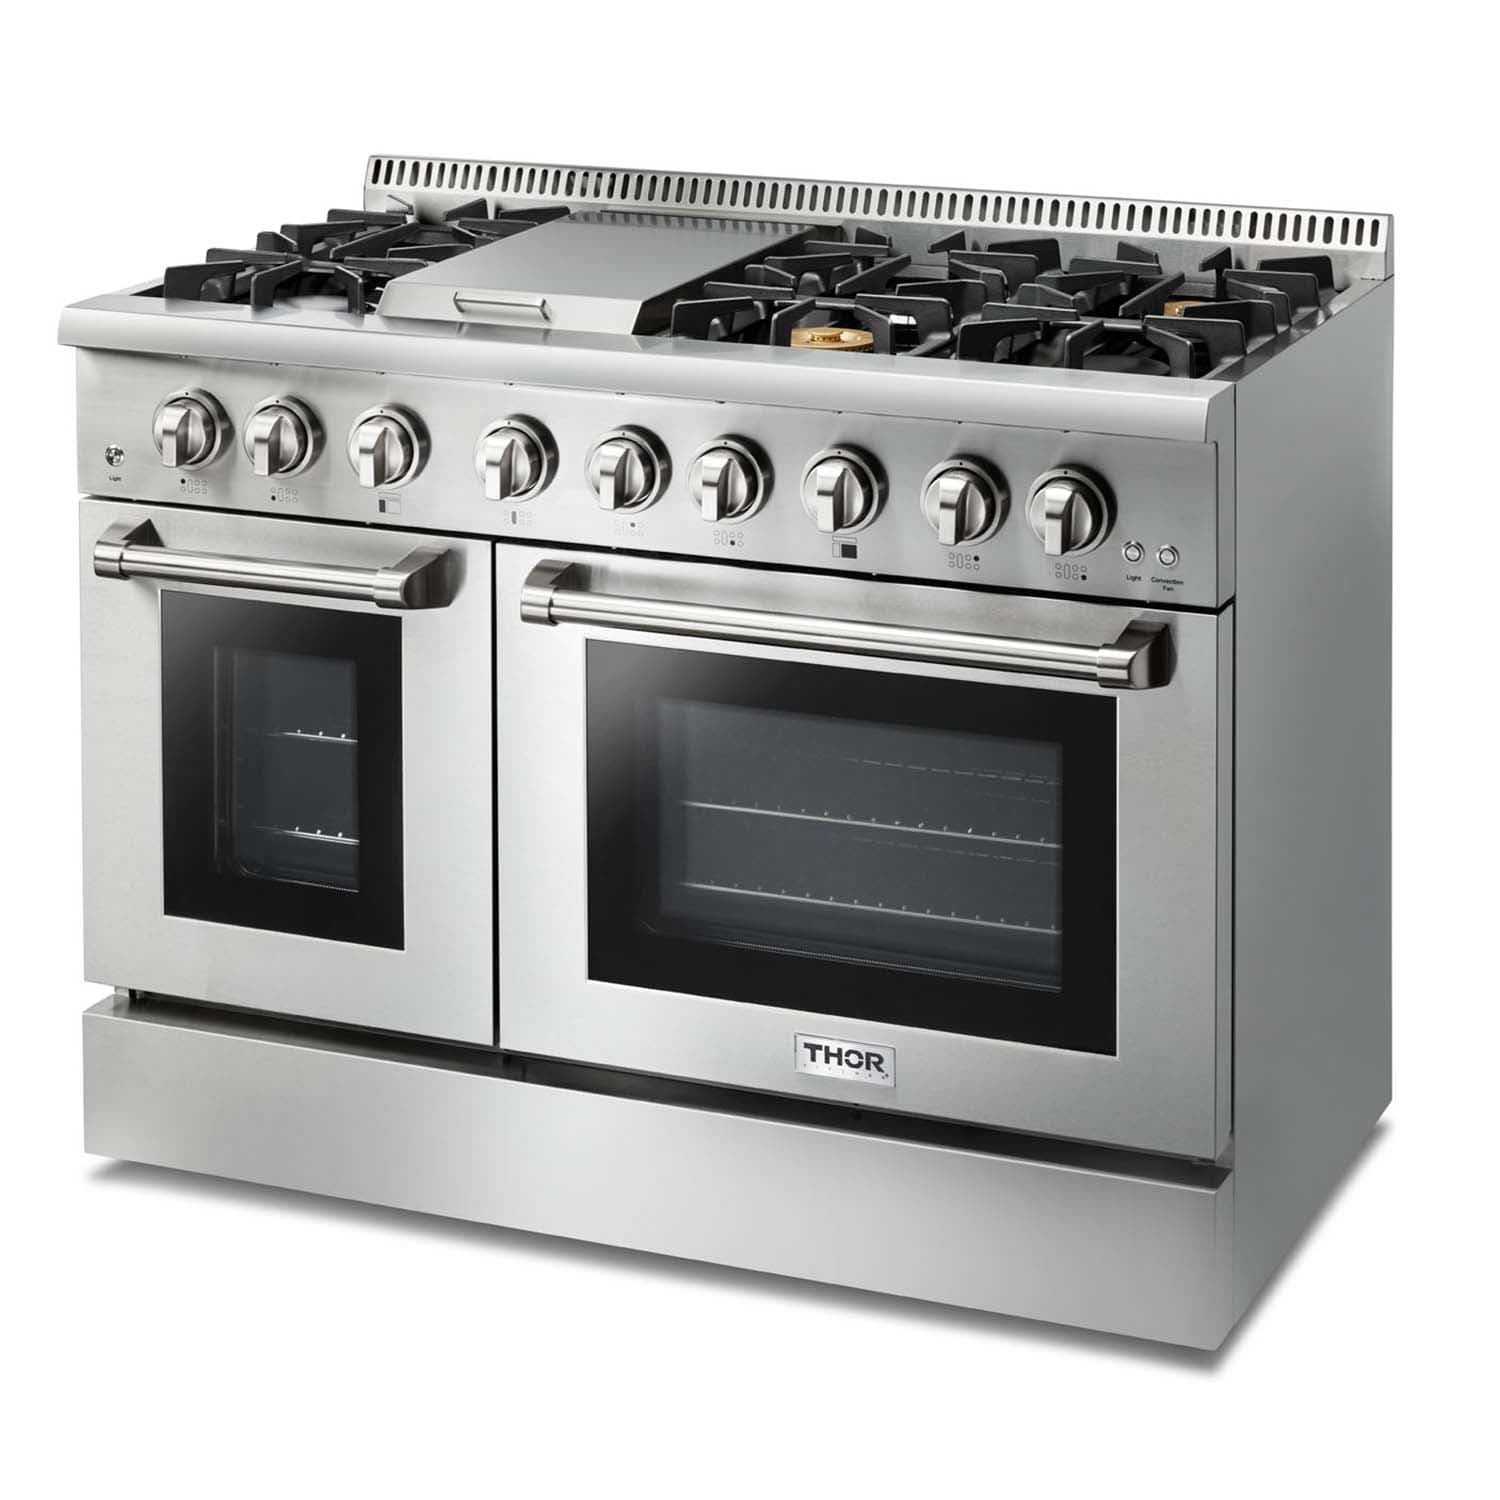 Thor Kitchen 48 in. Propane Gas Burner/Electric Oven 6.7 cu. ft. Range in Stainless Steel HRD4803ULP Ranges HRD4803ULP Luxury Appliances Direct